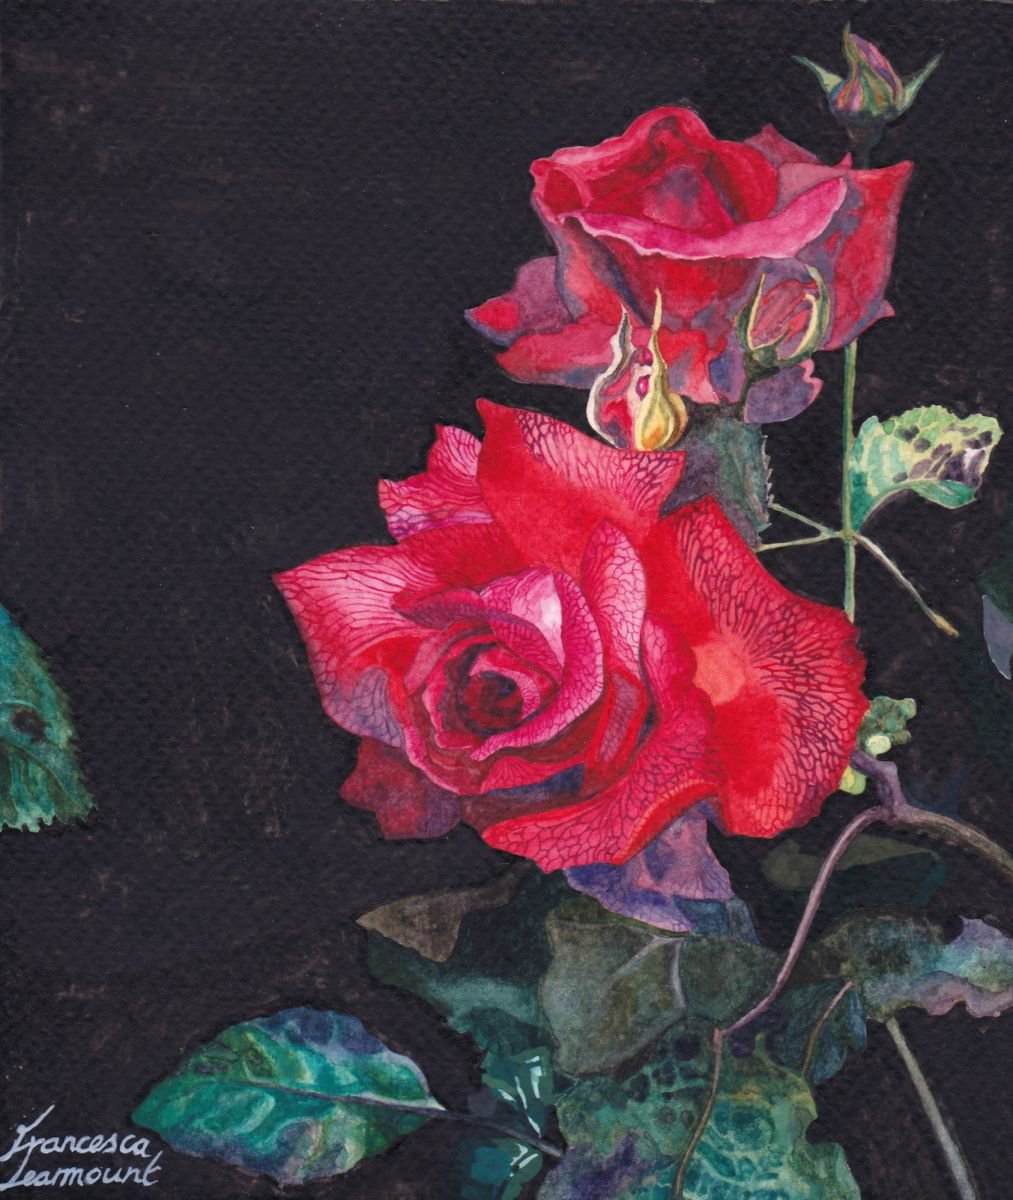 Roses by Francesca Learmount at Cicca-Art